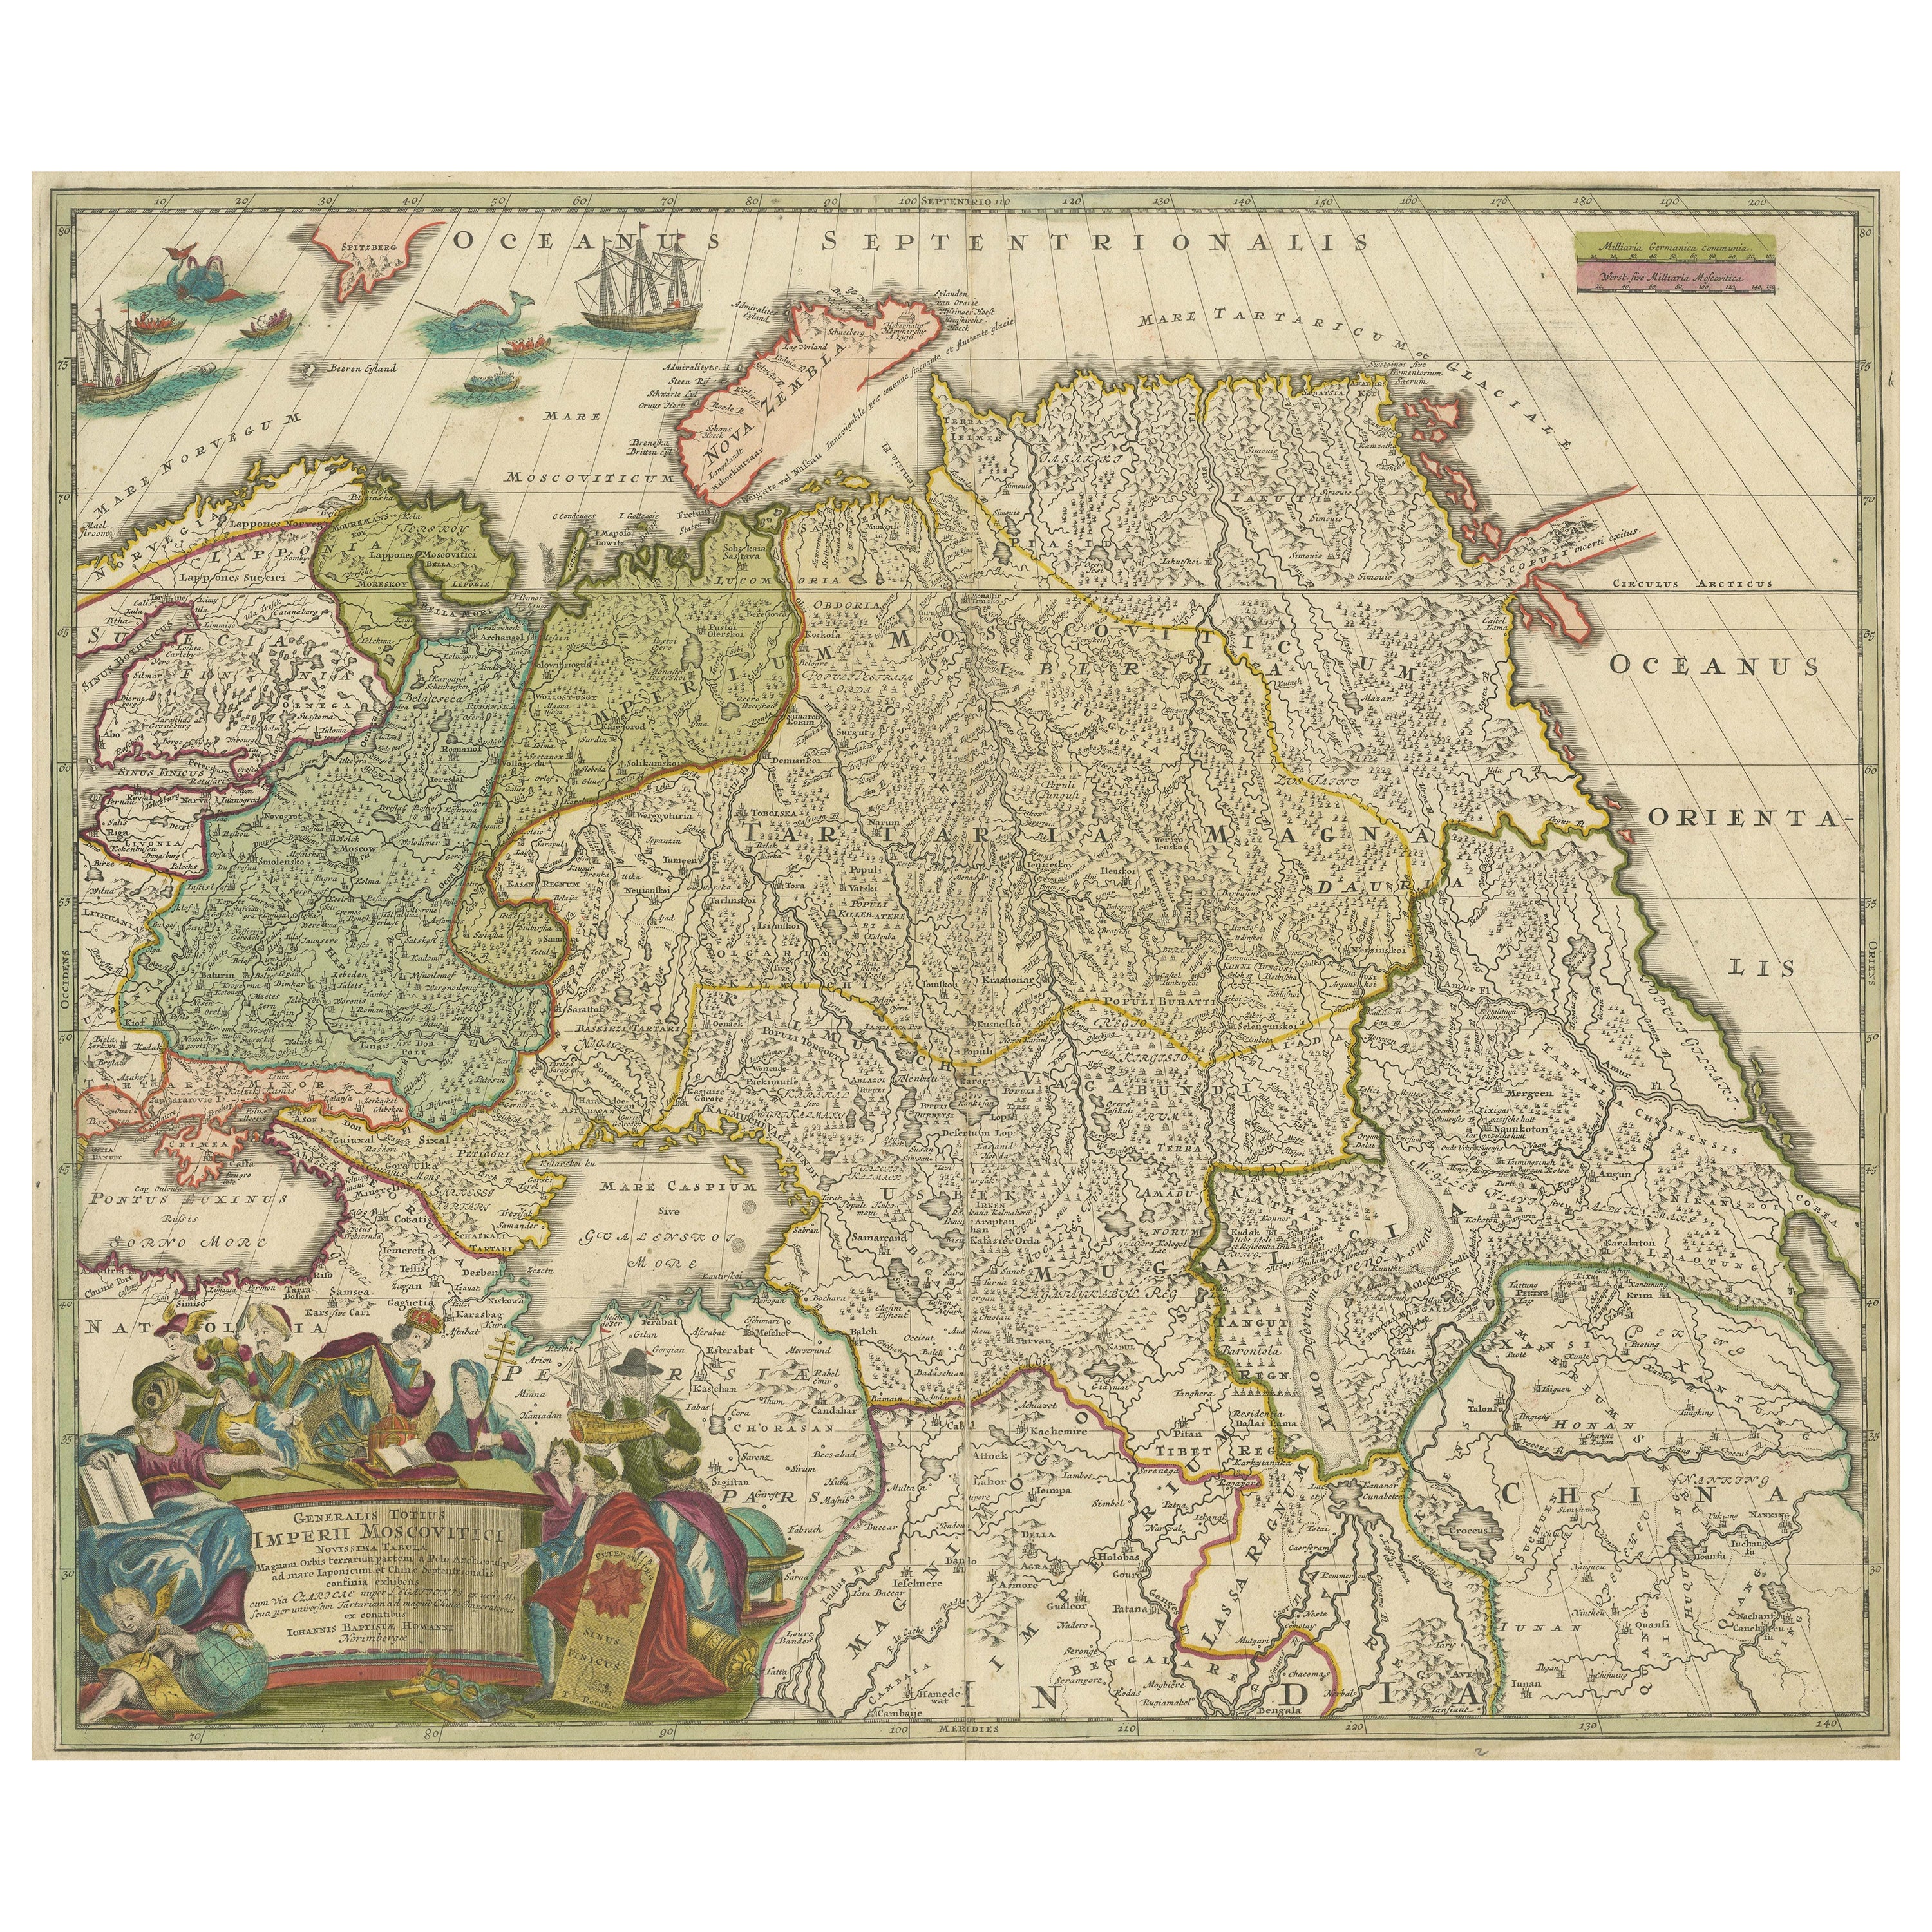 Antique Map of Russia and Central Asia, showing the Northeast Passage